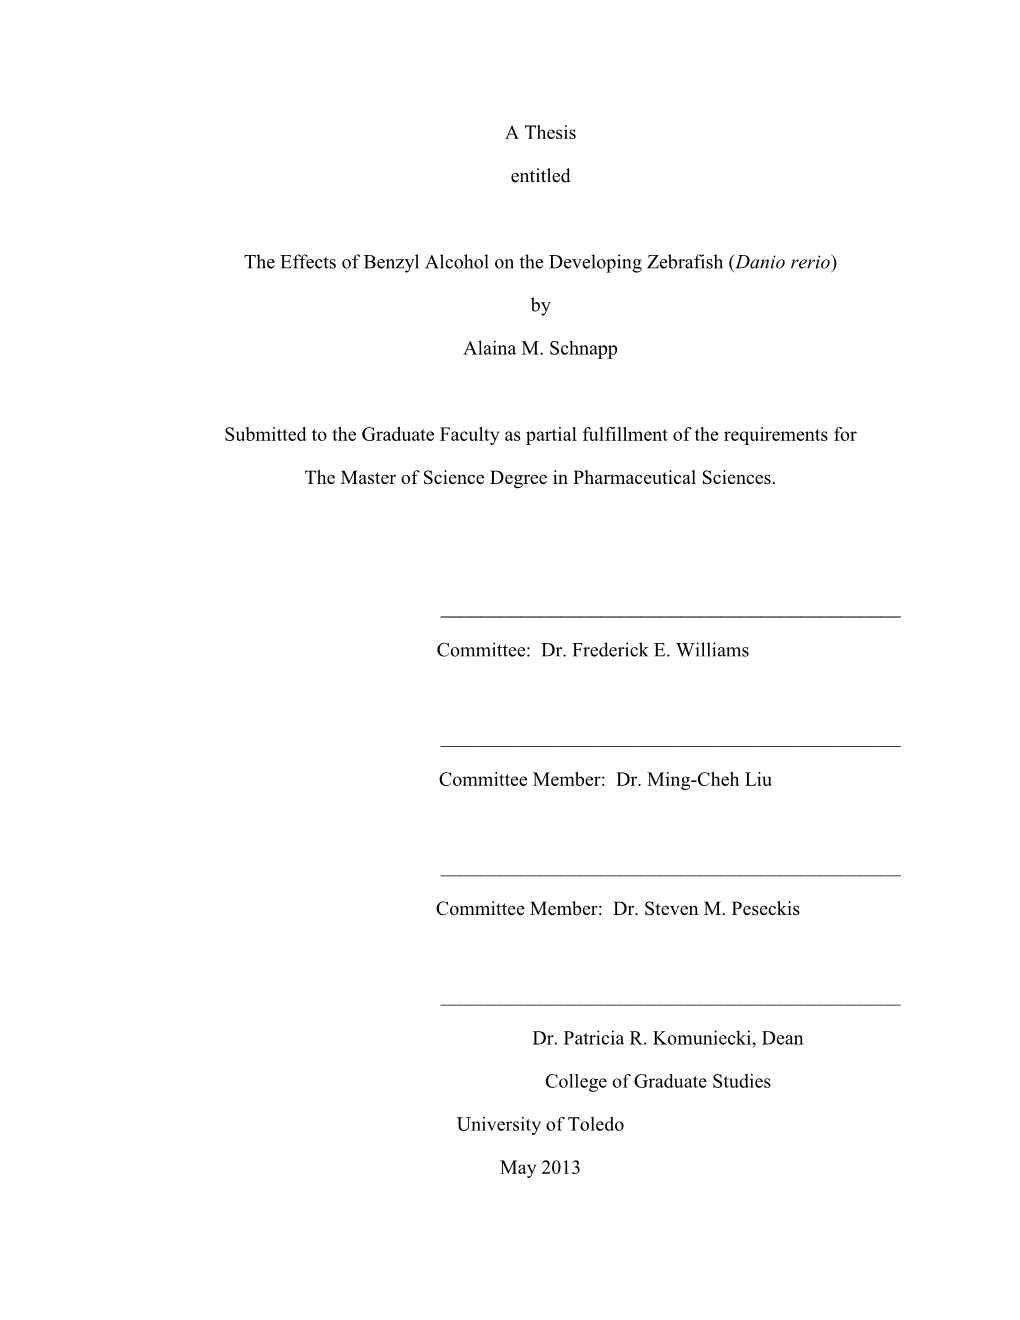 A Thesis Entitled the Effects of Benzyl Alcohol on the Developing